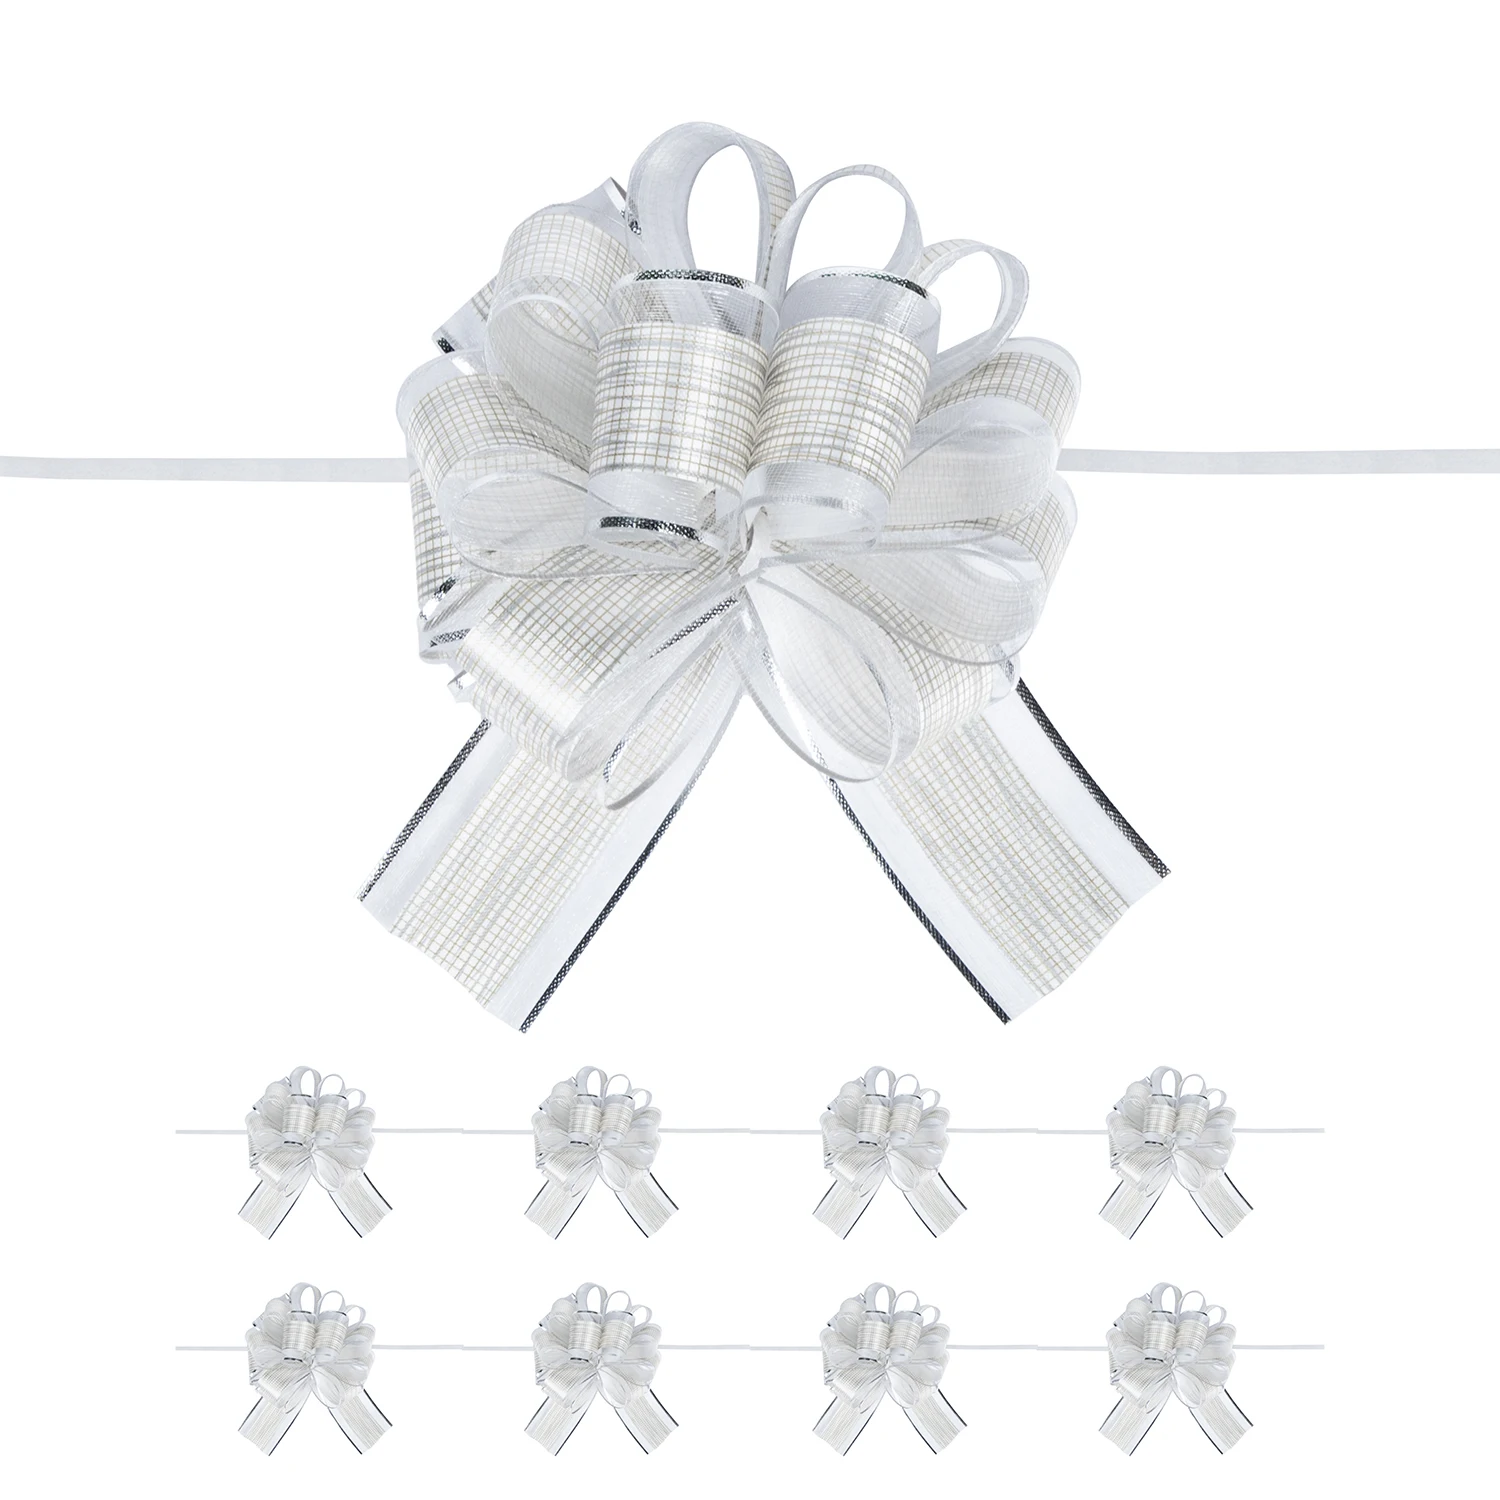 Large Ribbon Pull Bows Wedding Party Decoration Gift Wrap Packaging Christmas UK 